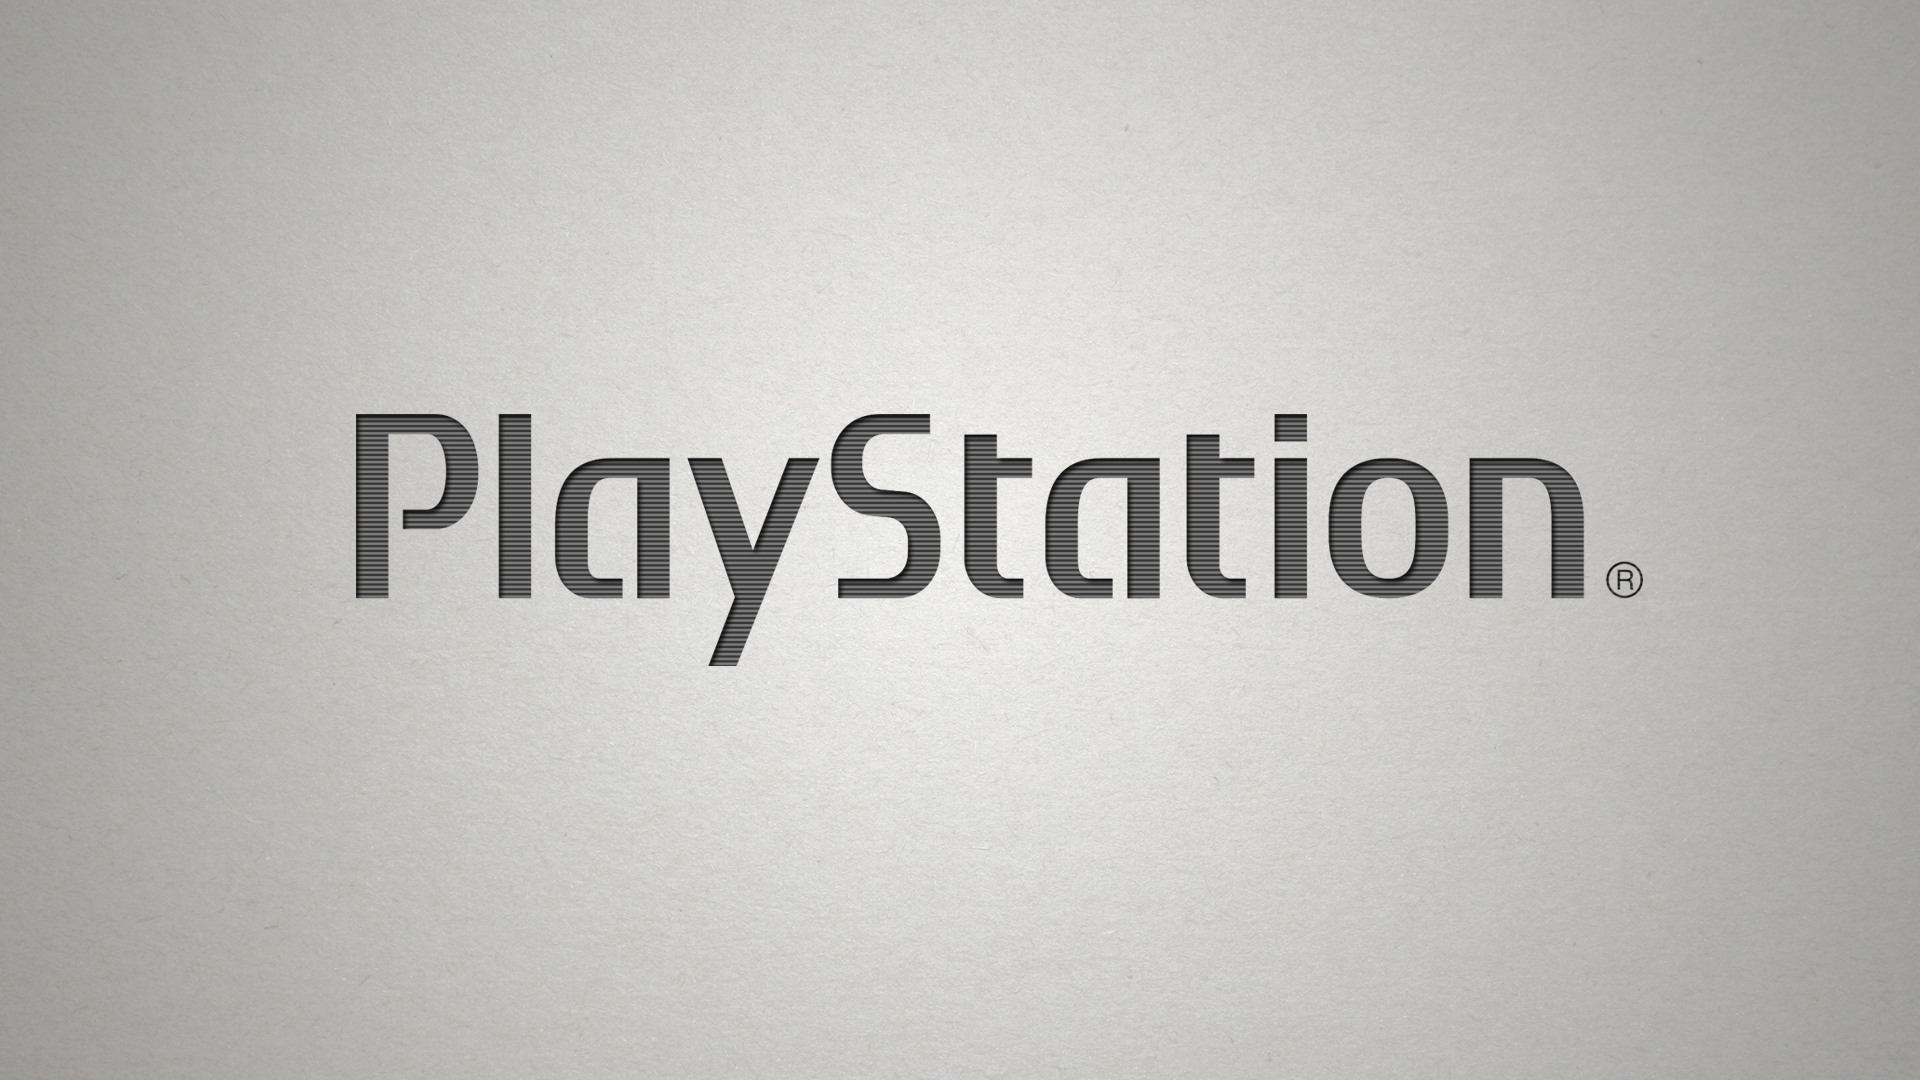 Video Game Playstation 1920x1080